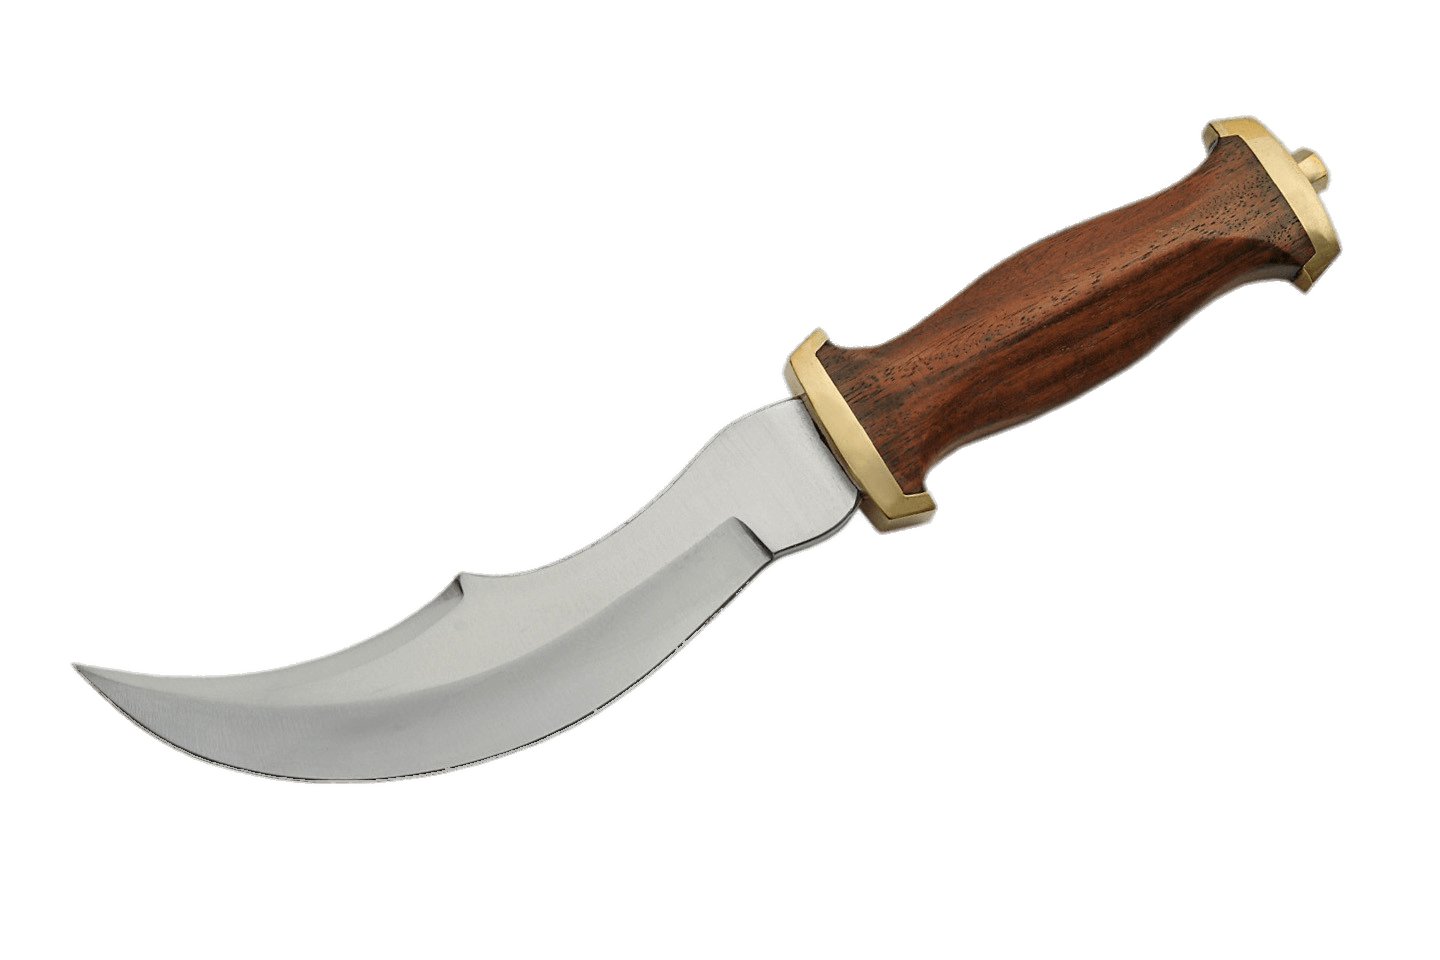 pirates clipart knife